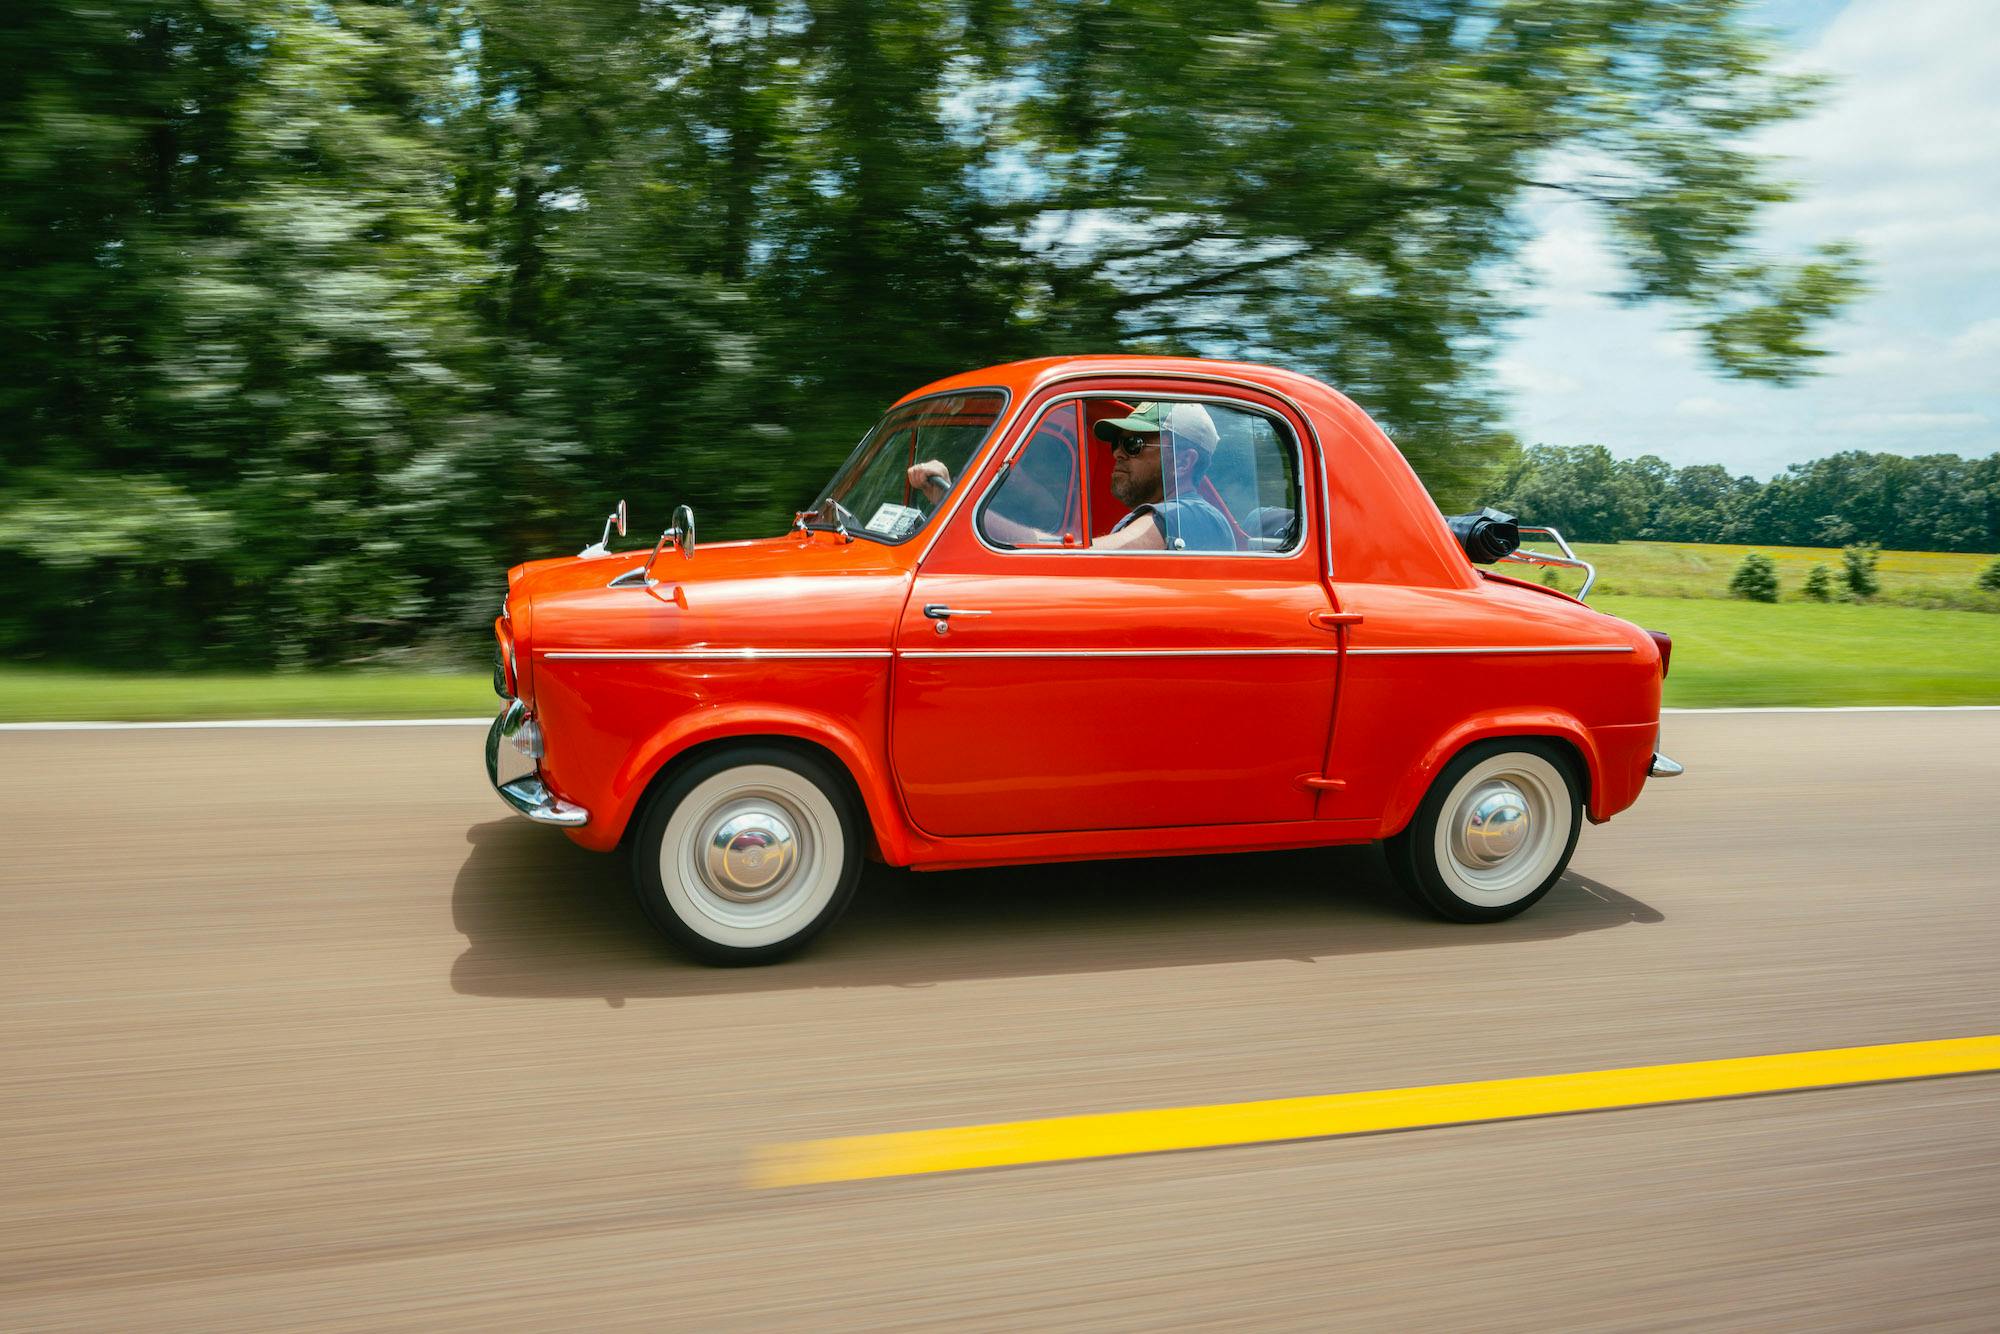 Microcar side view driving dynamic pan action